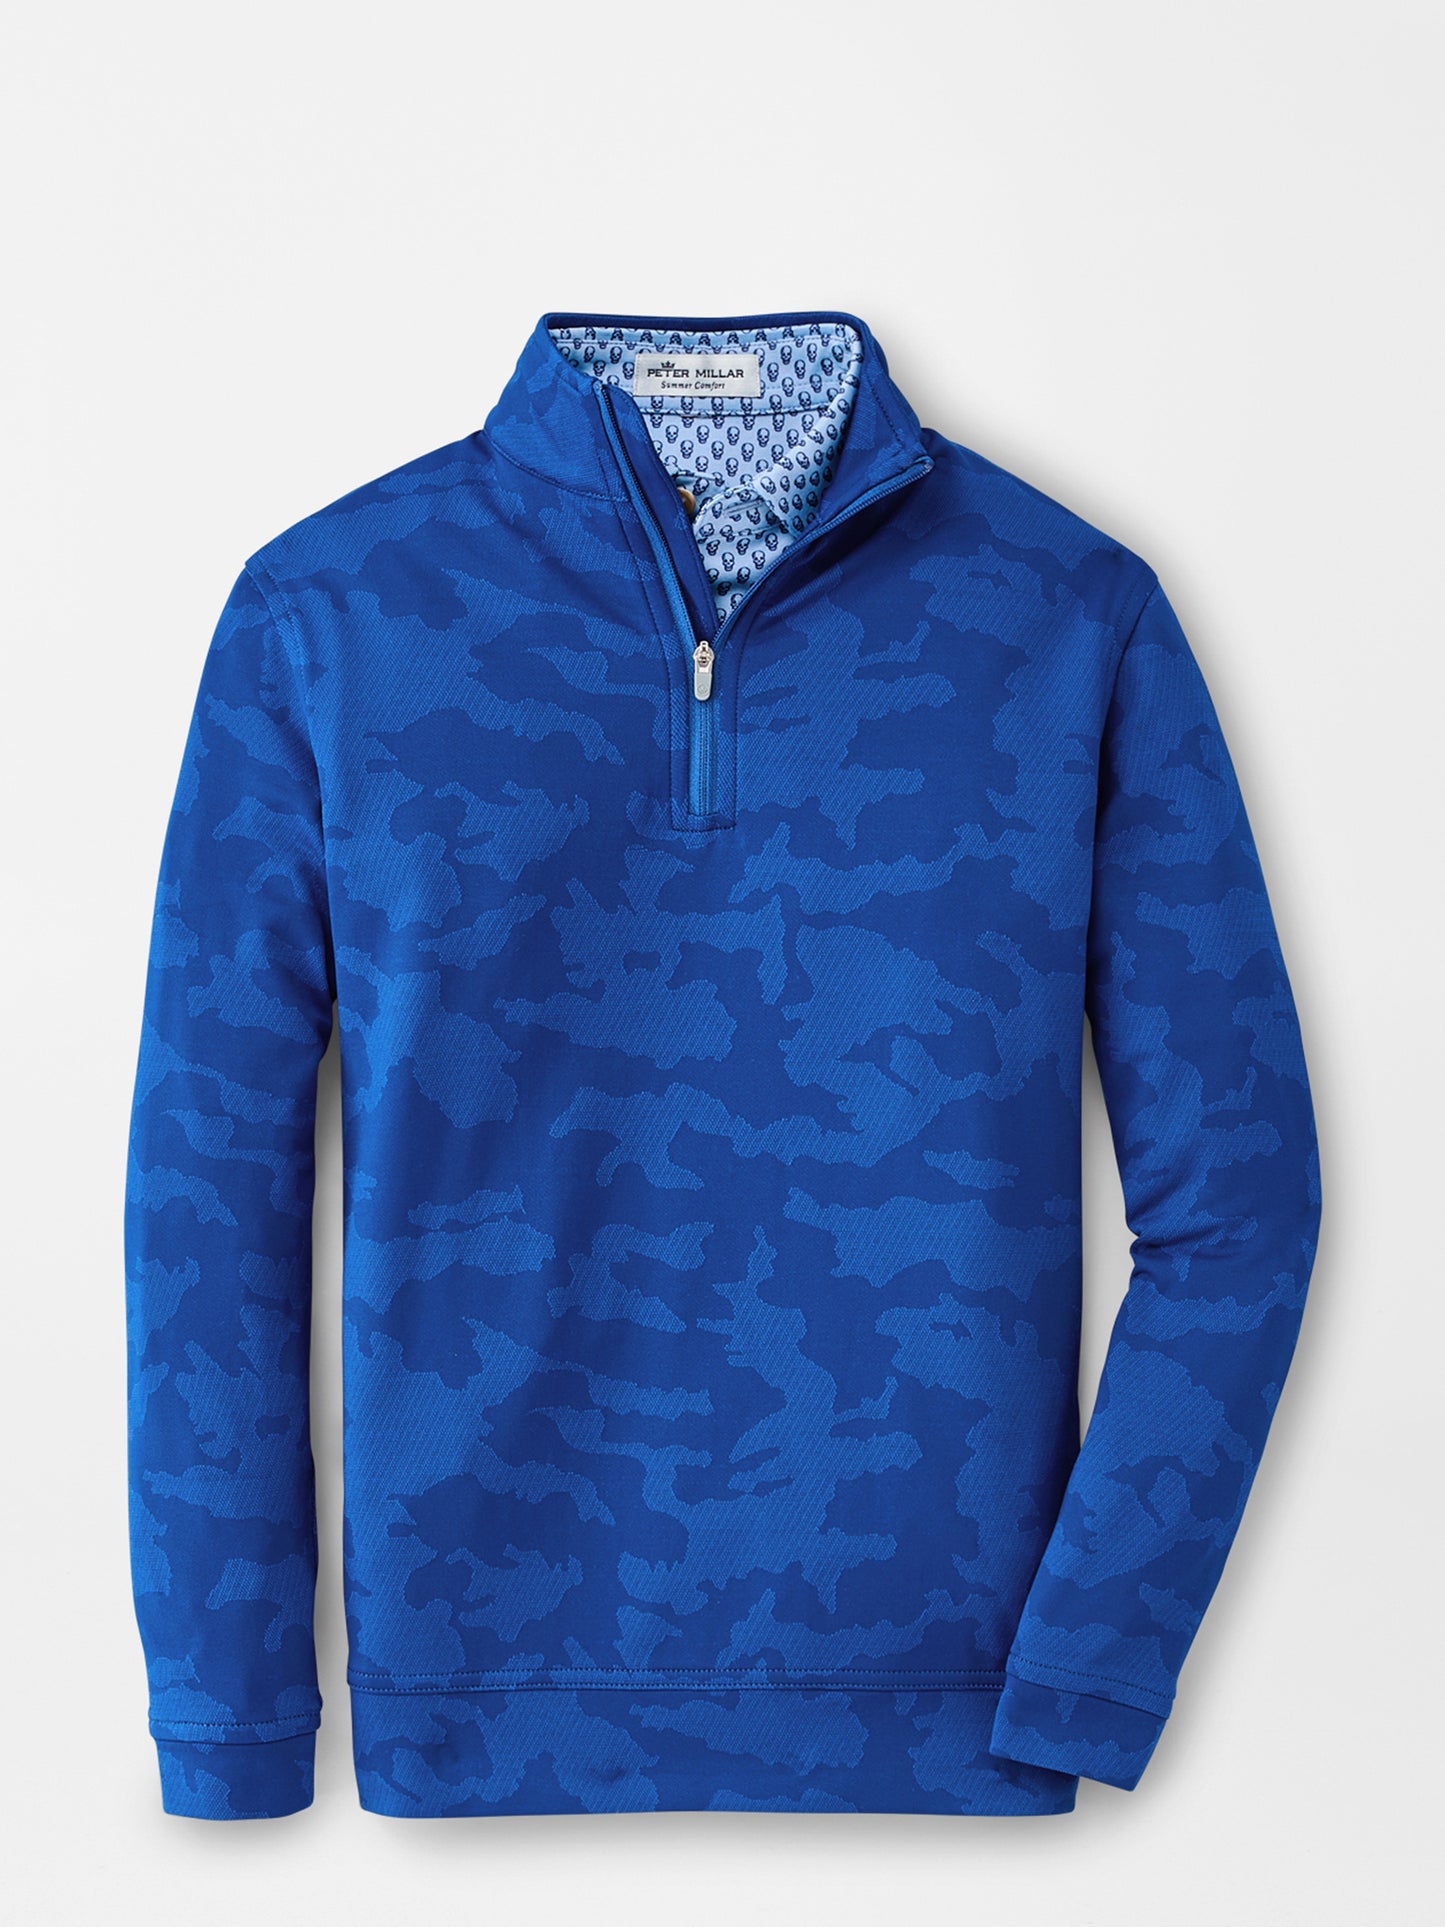 Peter Millar Youth Collection Boys' Camo Perth Performance Quarter-Zip